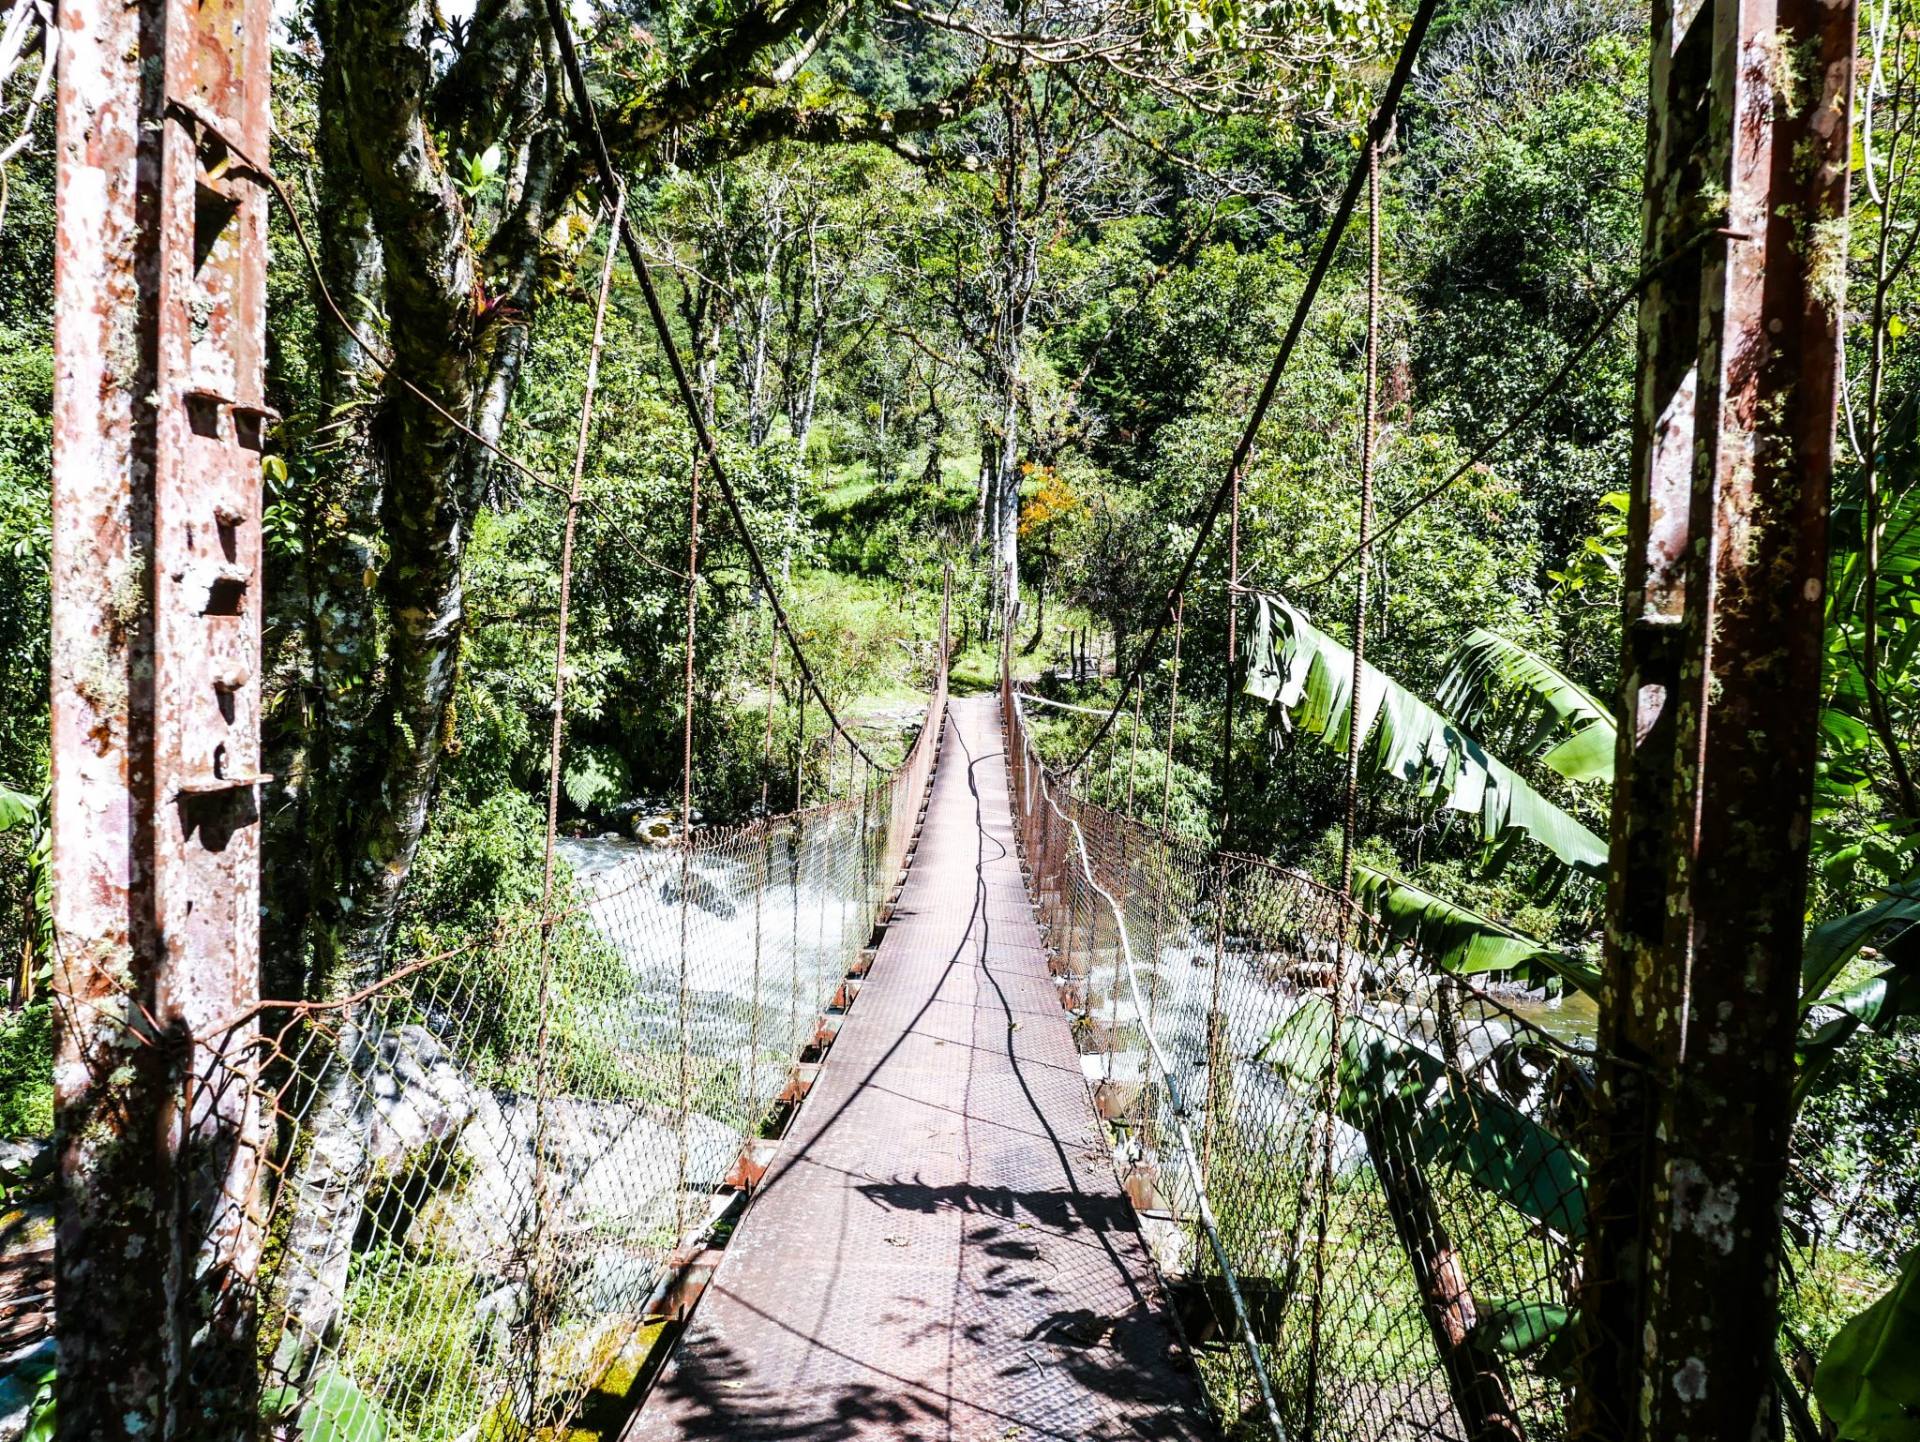 Hiking the Lost Waterfalls trail in Boquete, Panama is an absolutely more. Read this post to find out all about Boquete's best hike!